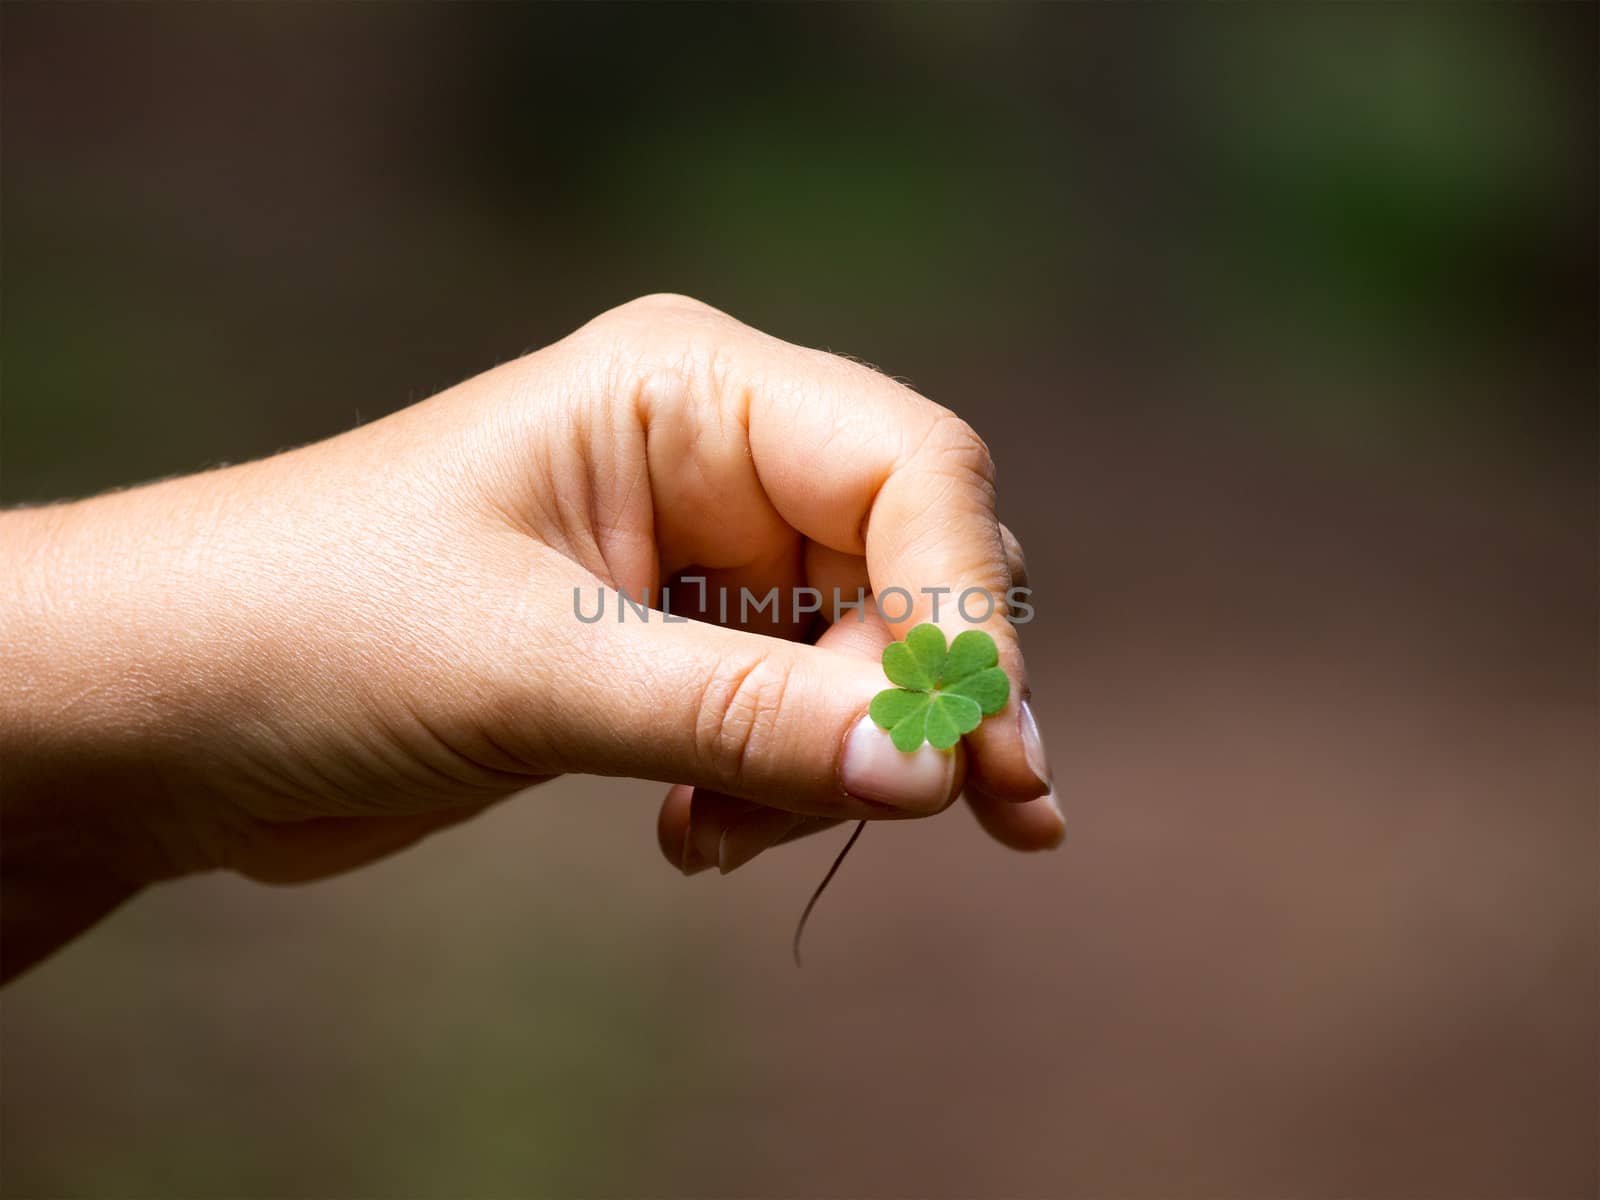 The rare find, a symbol of good luck - four-leaves clover from the Rhodope mountains forest (Bulgaria)